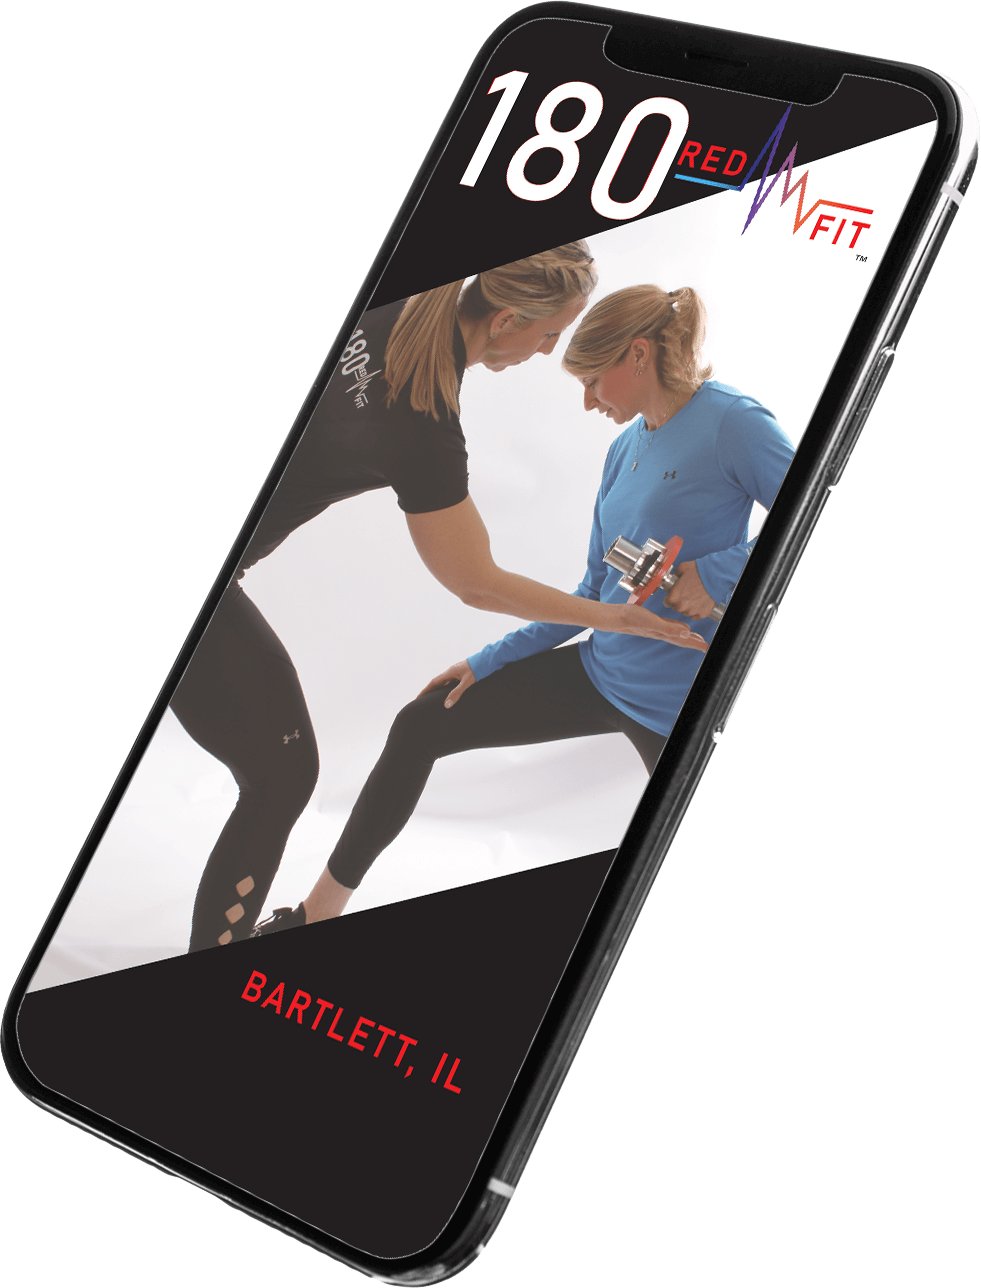 180 Red Fit App